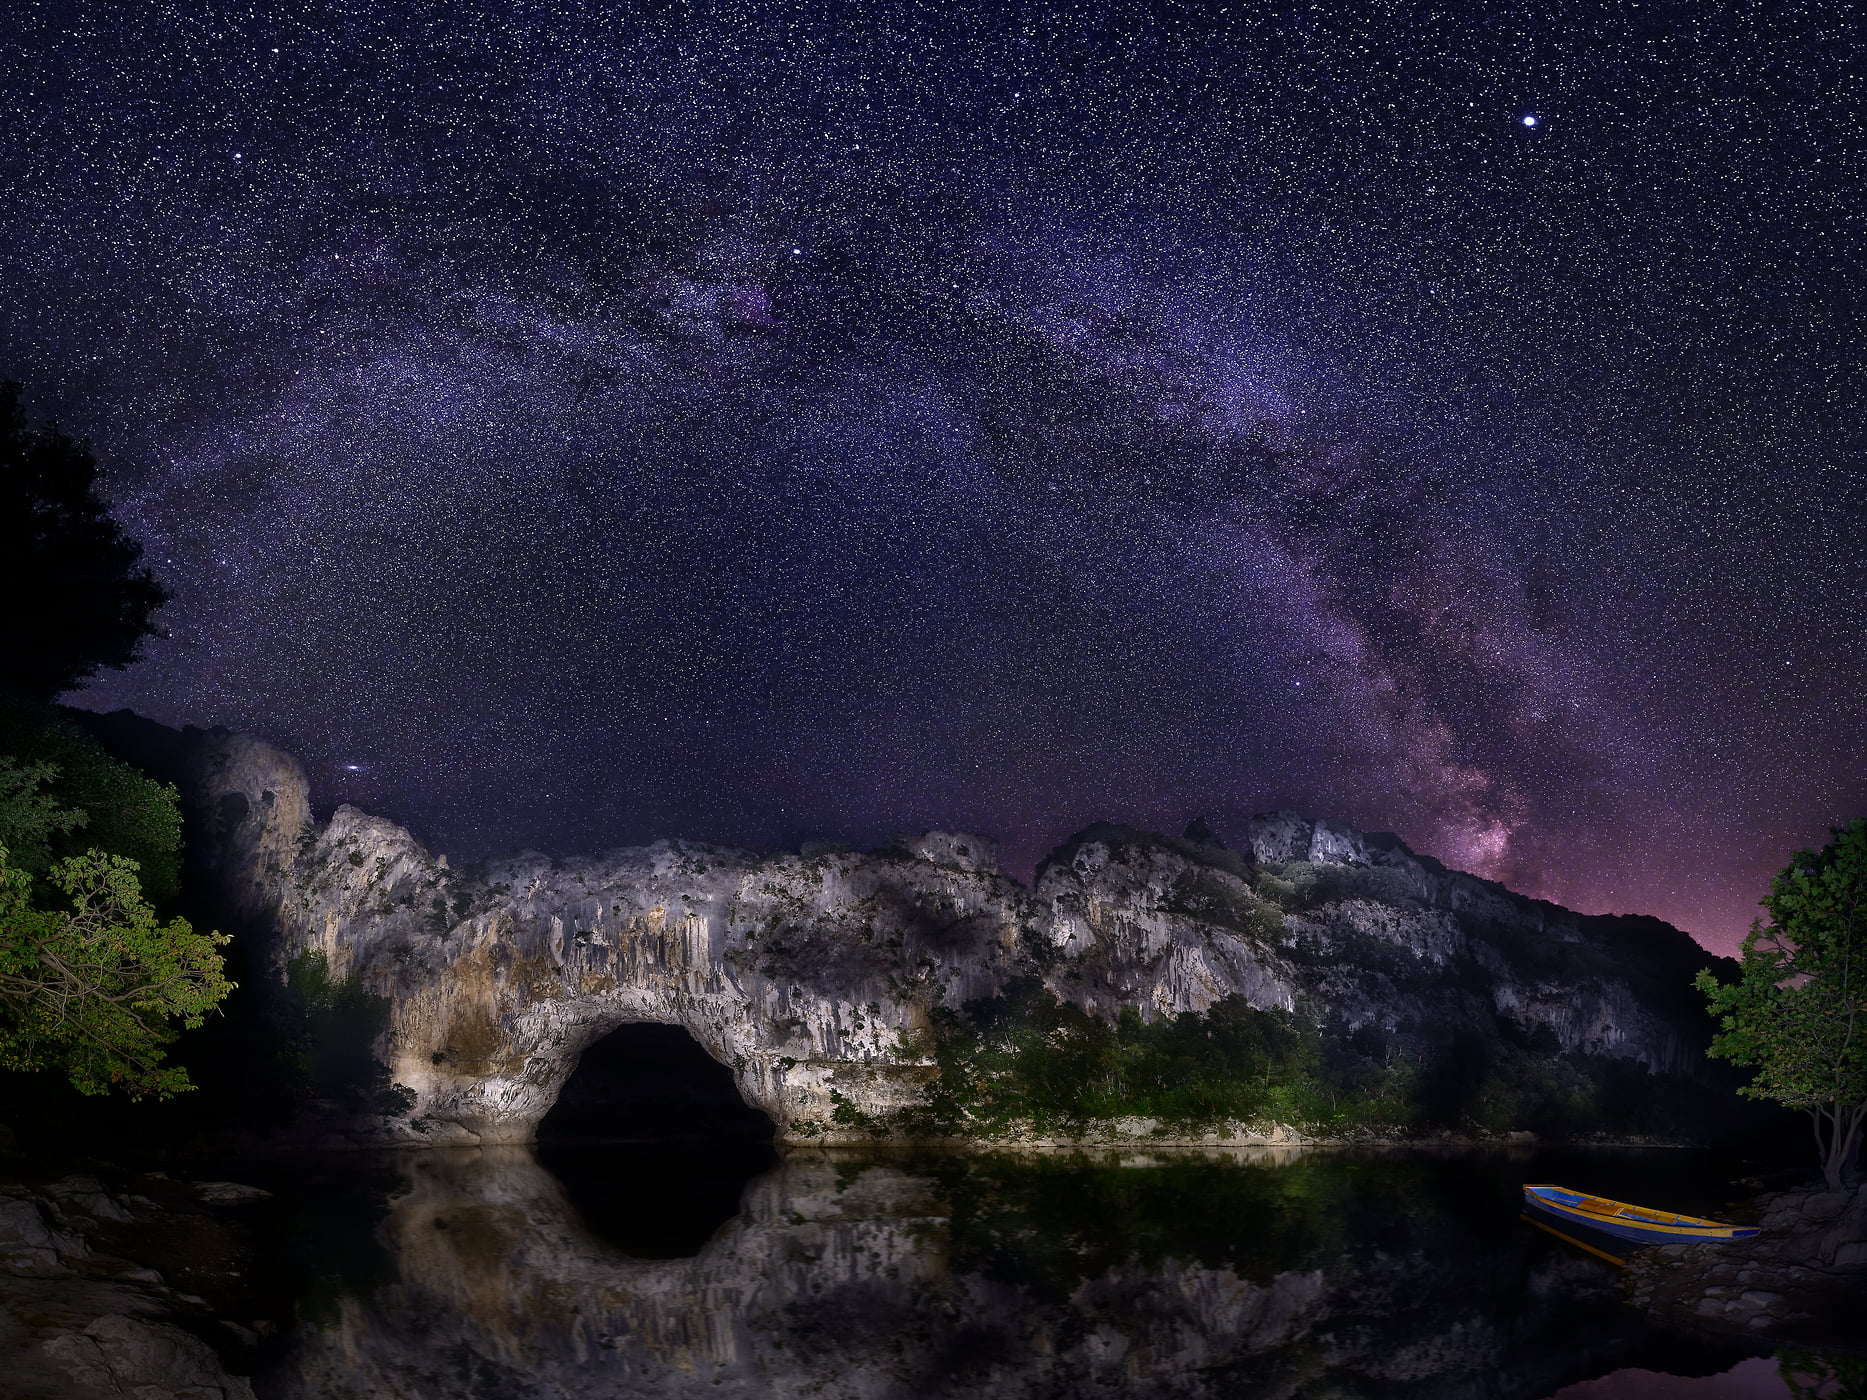 650 megapixels! A very high resolution, large-format VAST photo print of the night sky and Milky Way above a lake and cave; astrophotograph created by David Meaux in Pont d'Arc, Vallon-Pont-d'Arc, Ardèche, France.